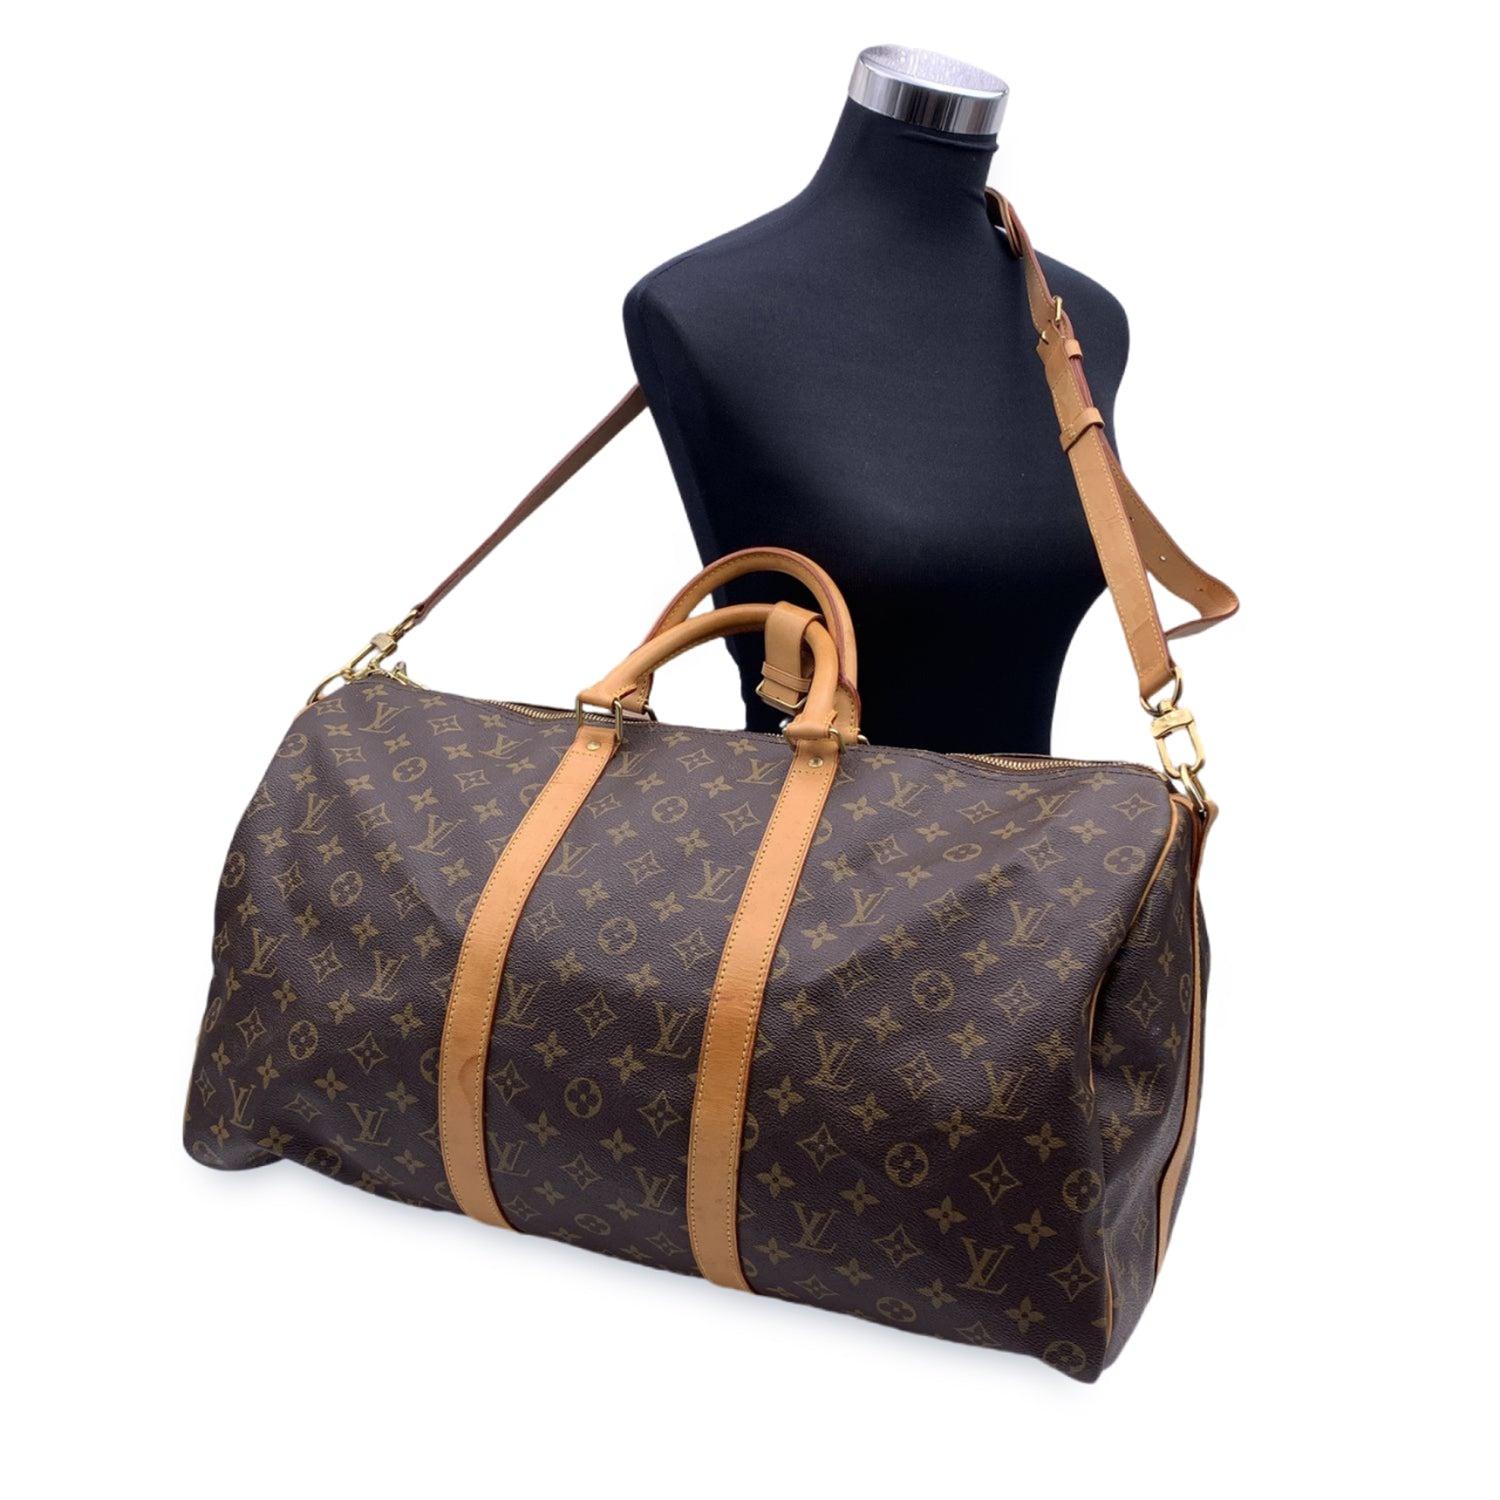 This beautiful Bag will come with a Certificate of Authenticity provided by Entrupy. The certificate will be provided at no further cost. Vintage Louis Vuitton 'Keepall Bandouliere 50' Travel bag. Monogram canvas and beige leather trim. Double zip